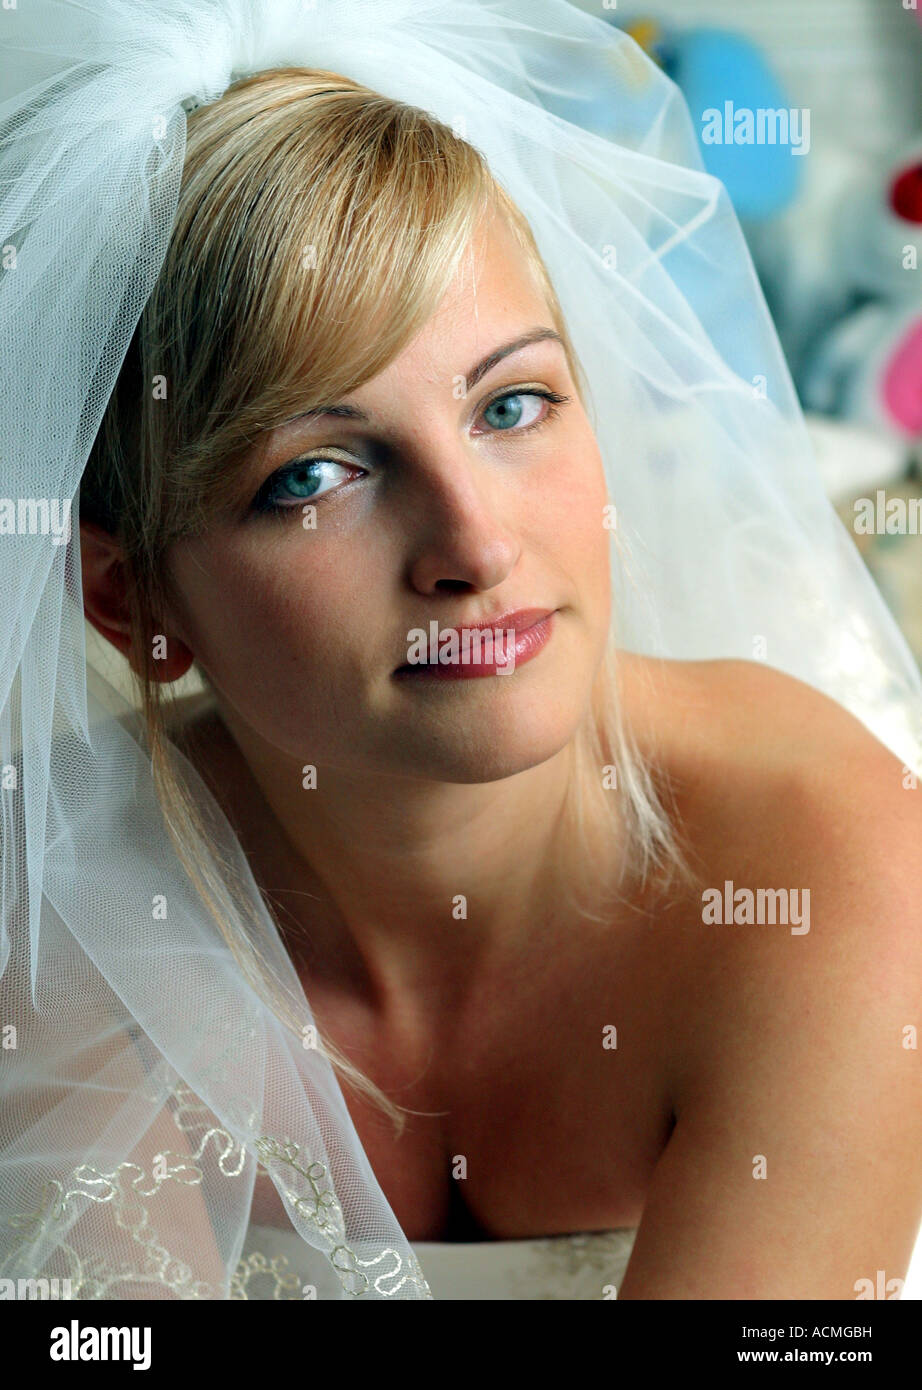 Portrait of a smiling bride in half body picture smiling with veil Stock Photo